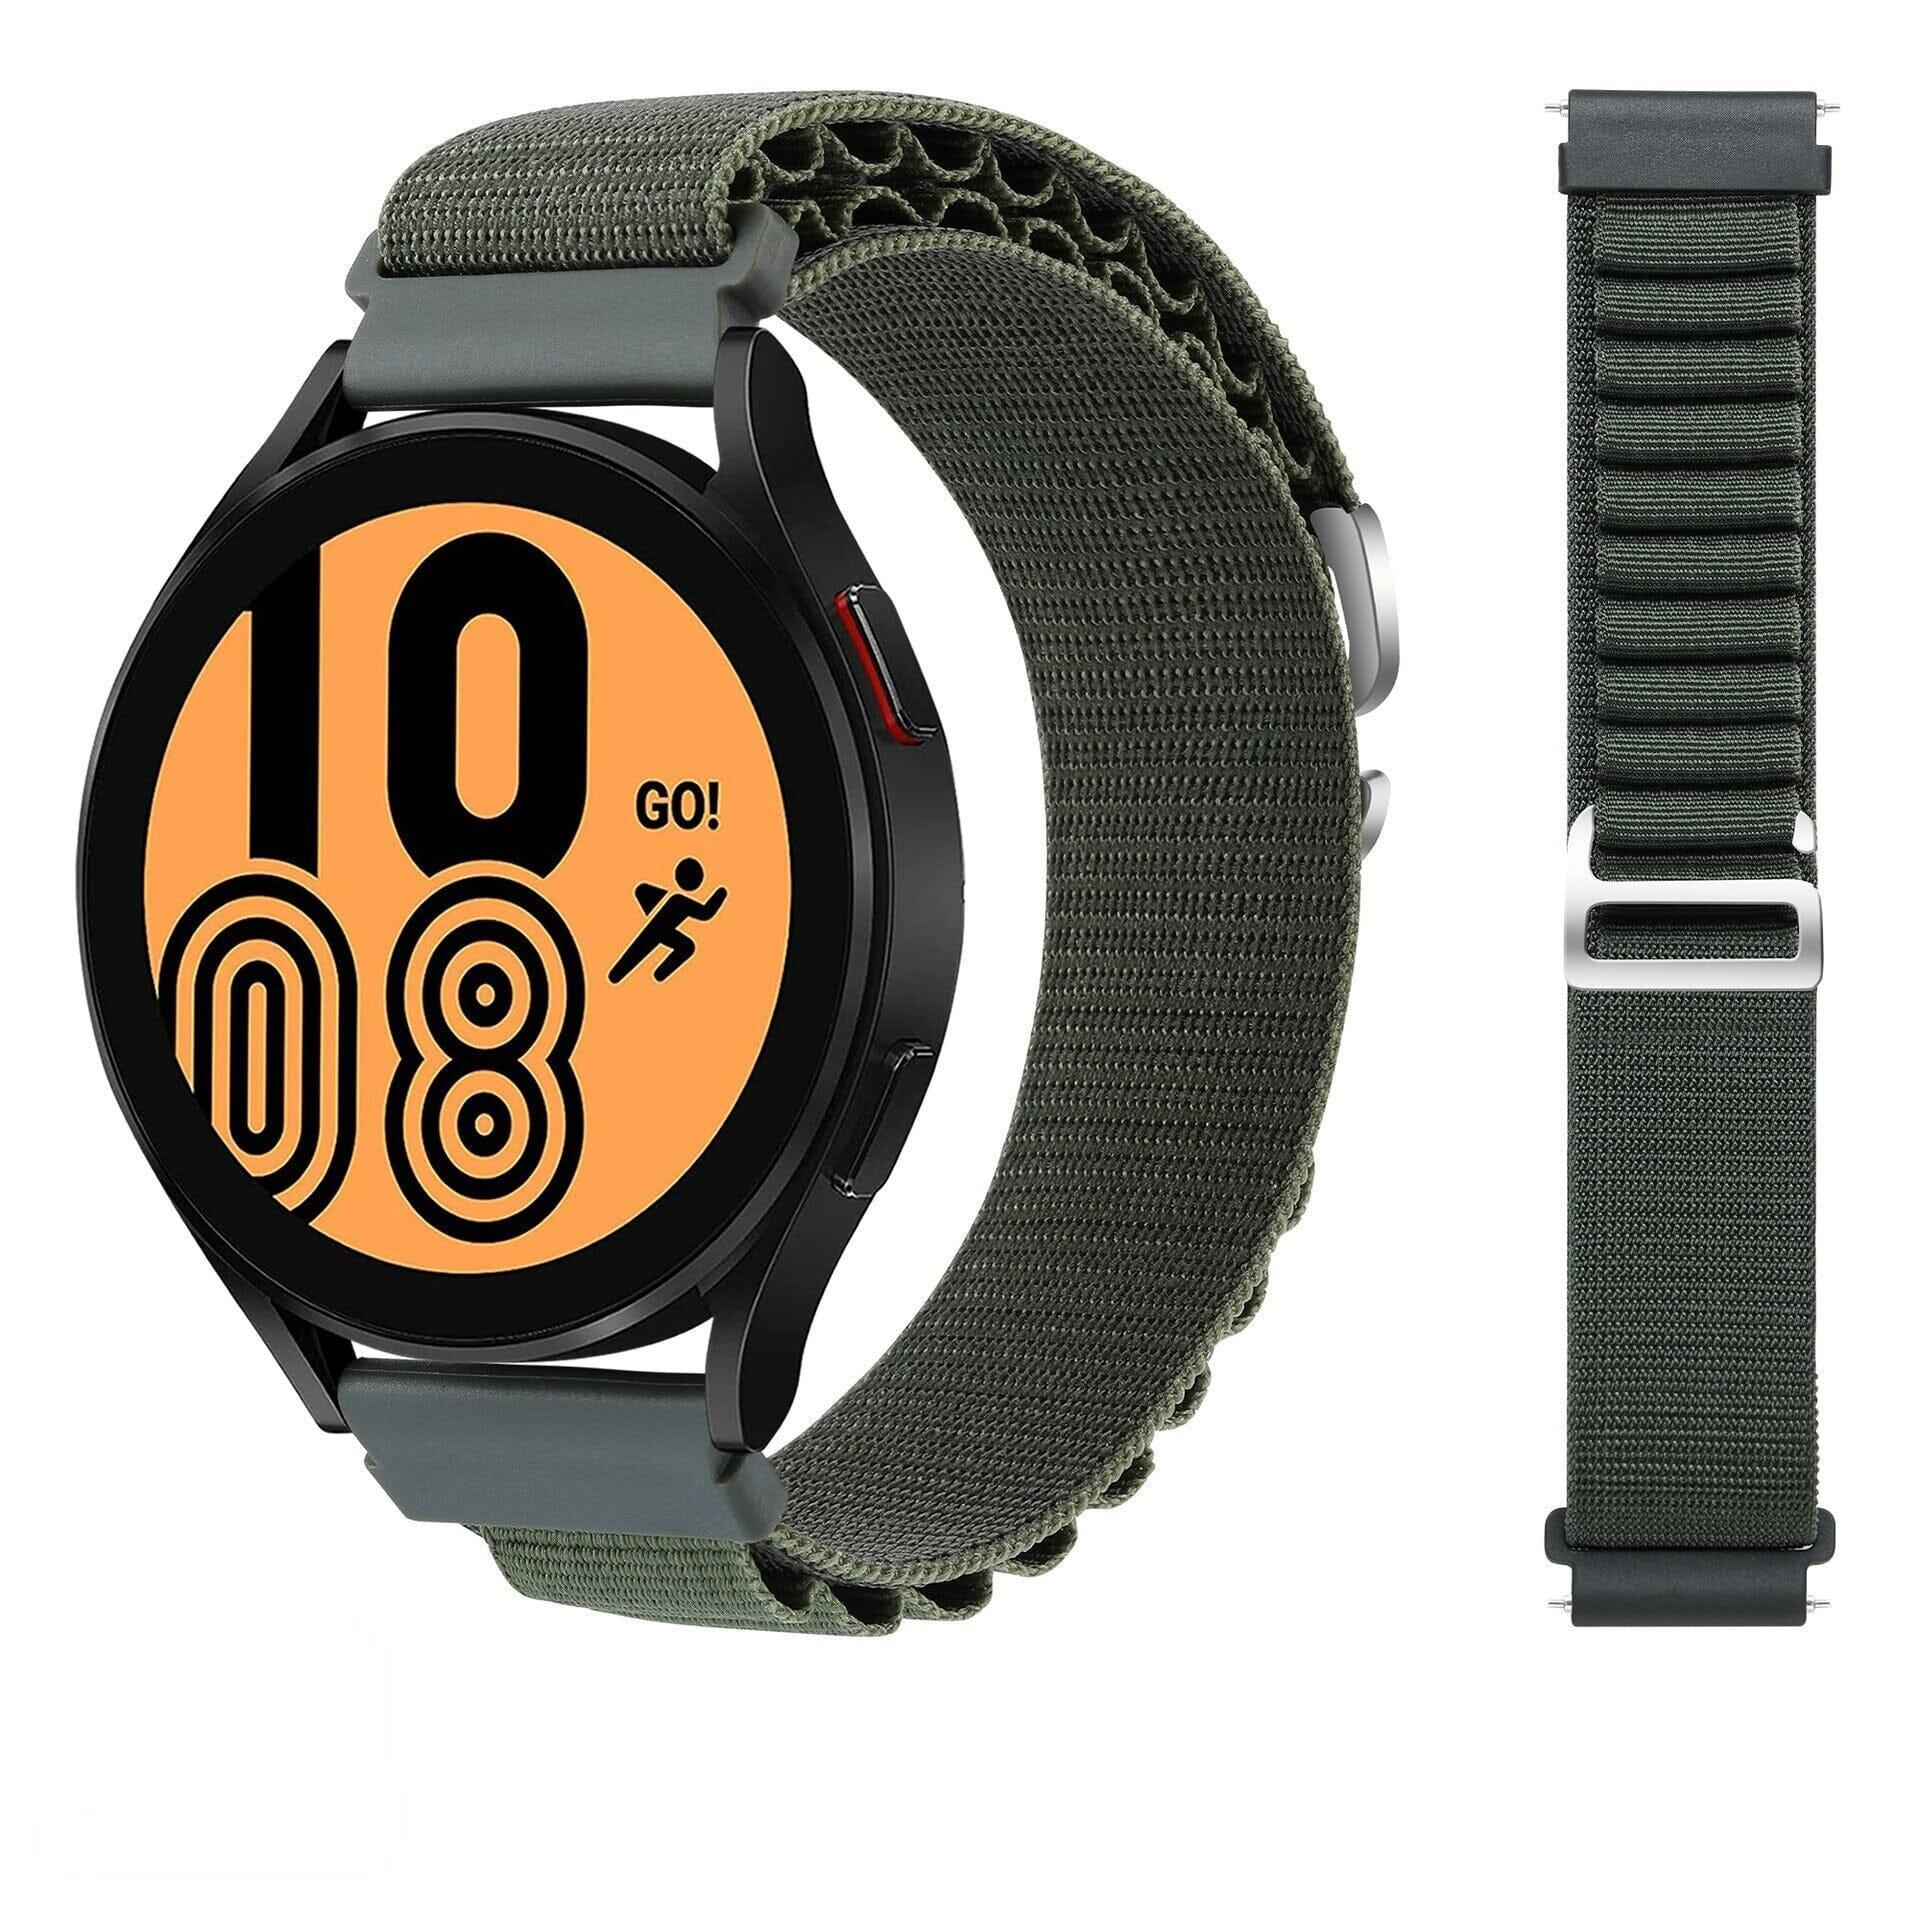 Alpine Loop Watch Straps Compatible with the LG Watch Style